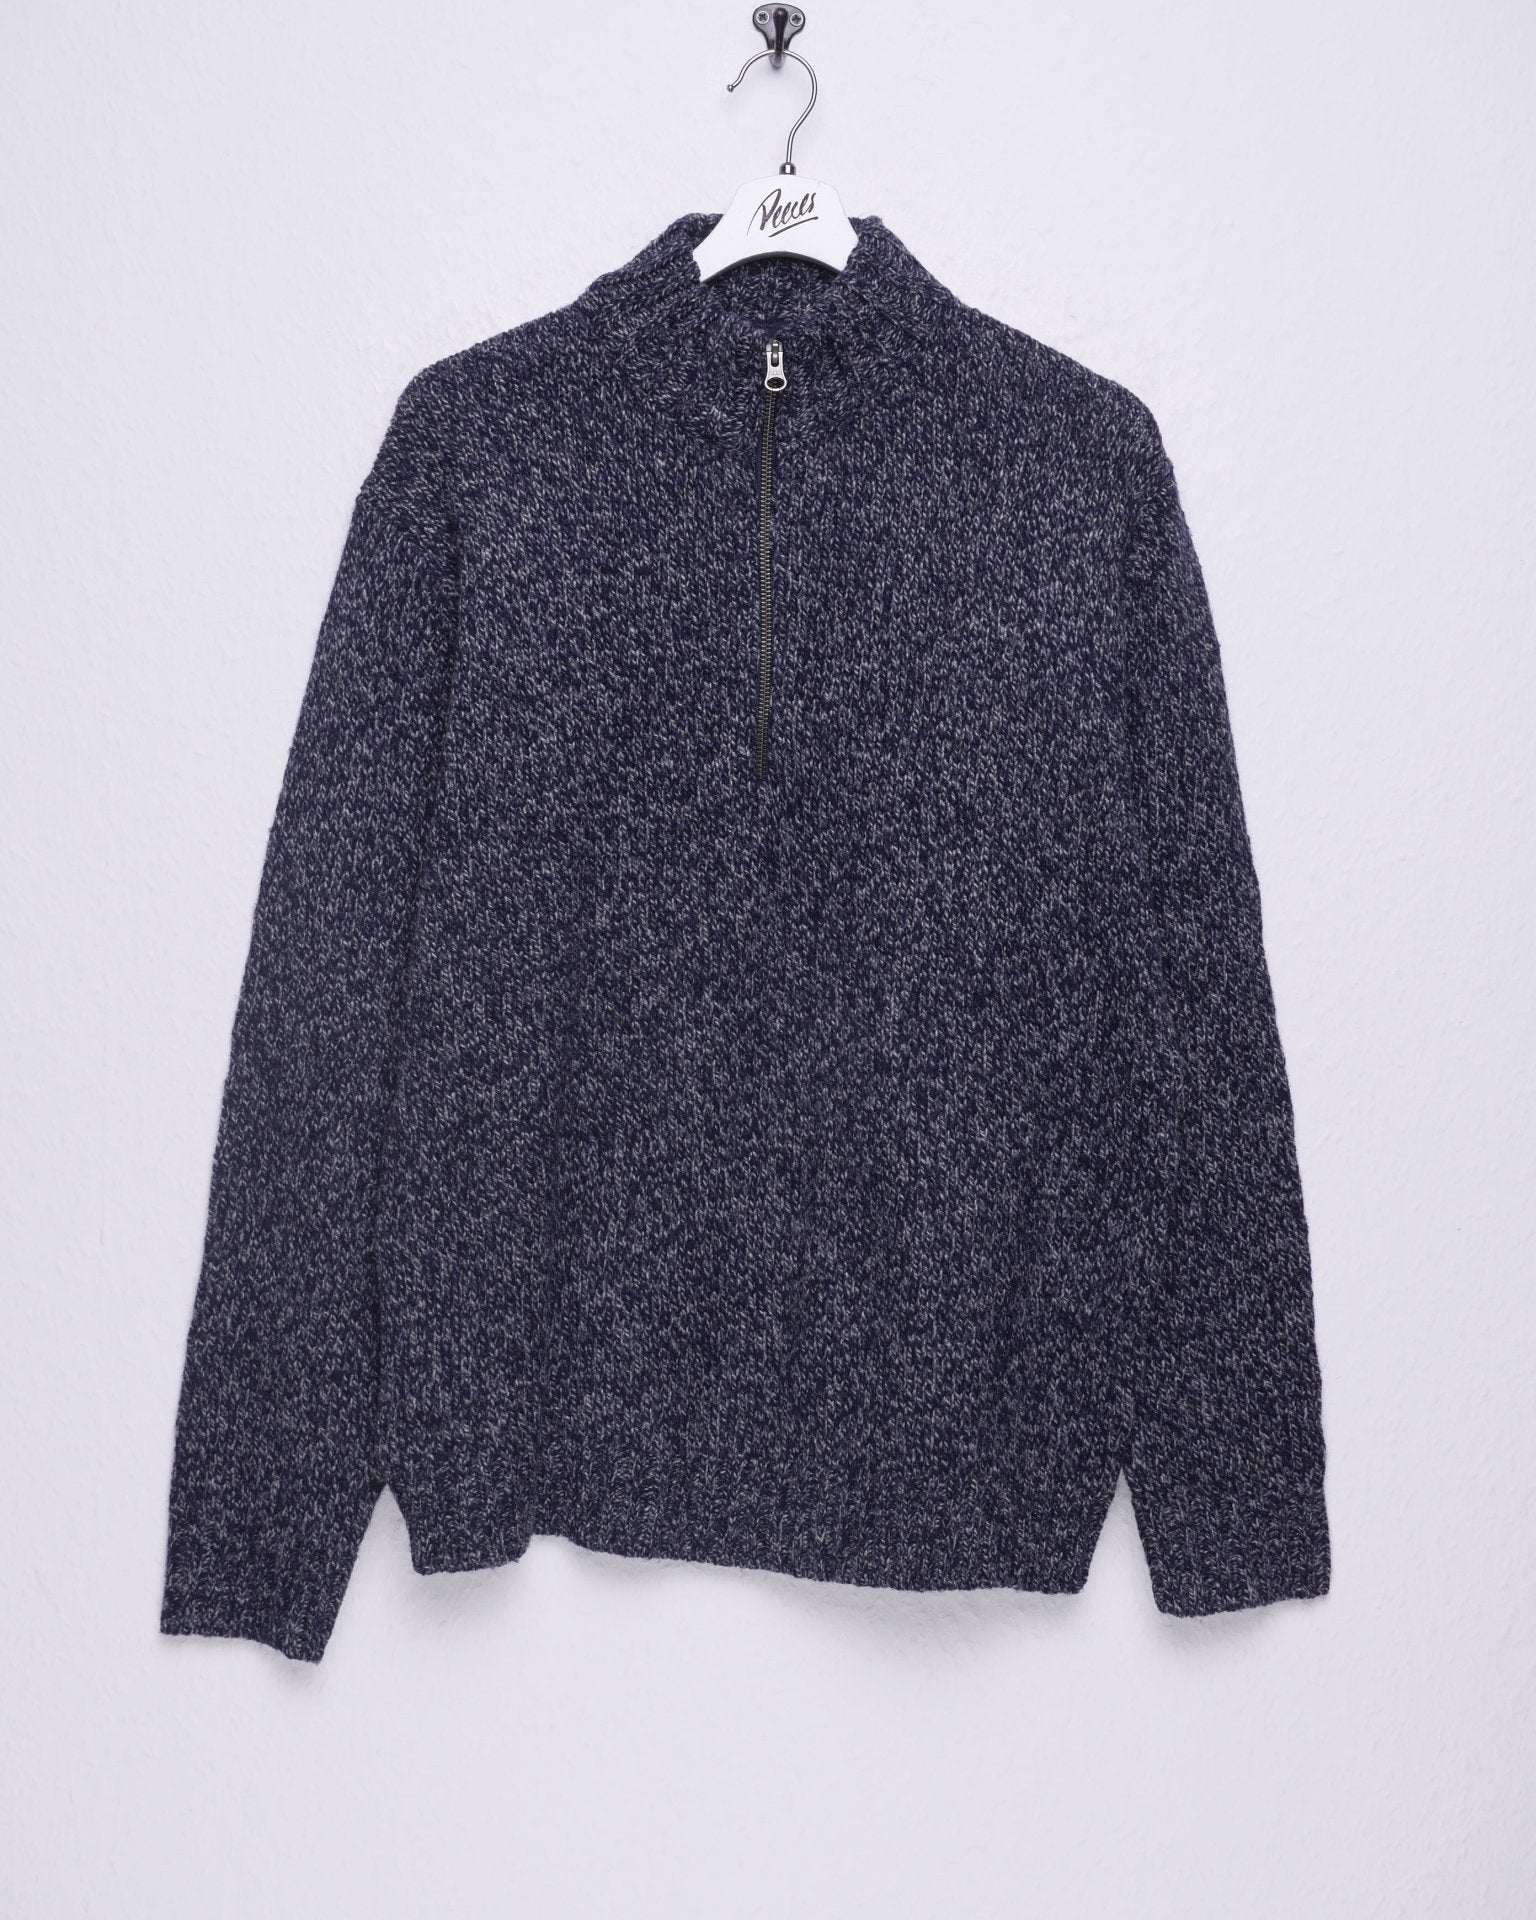 Woolrich two toned Vintage Zip Sweater - Peeces